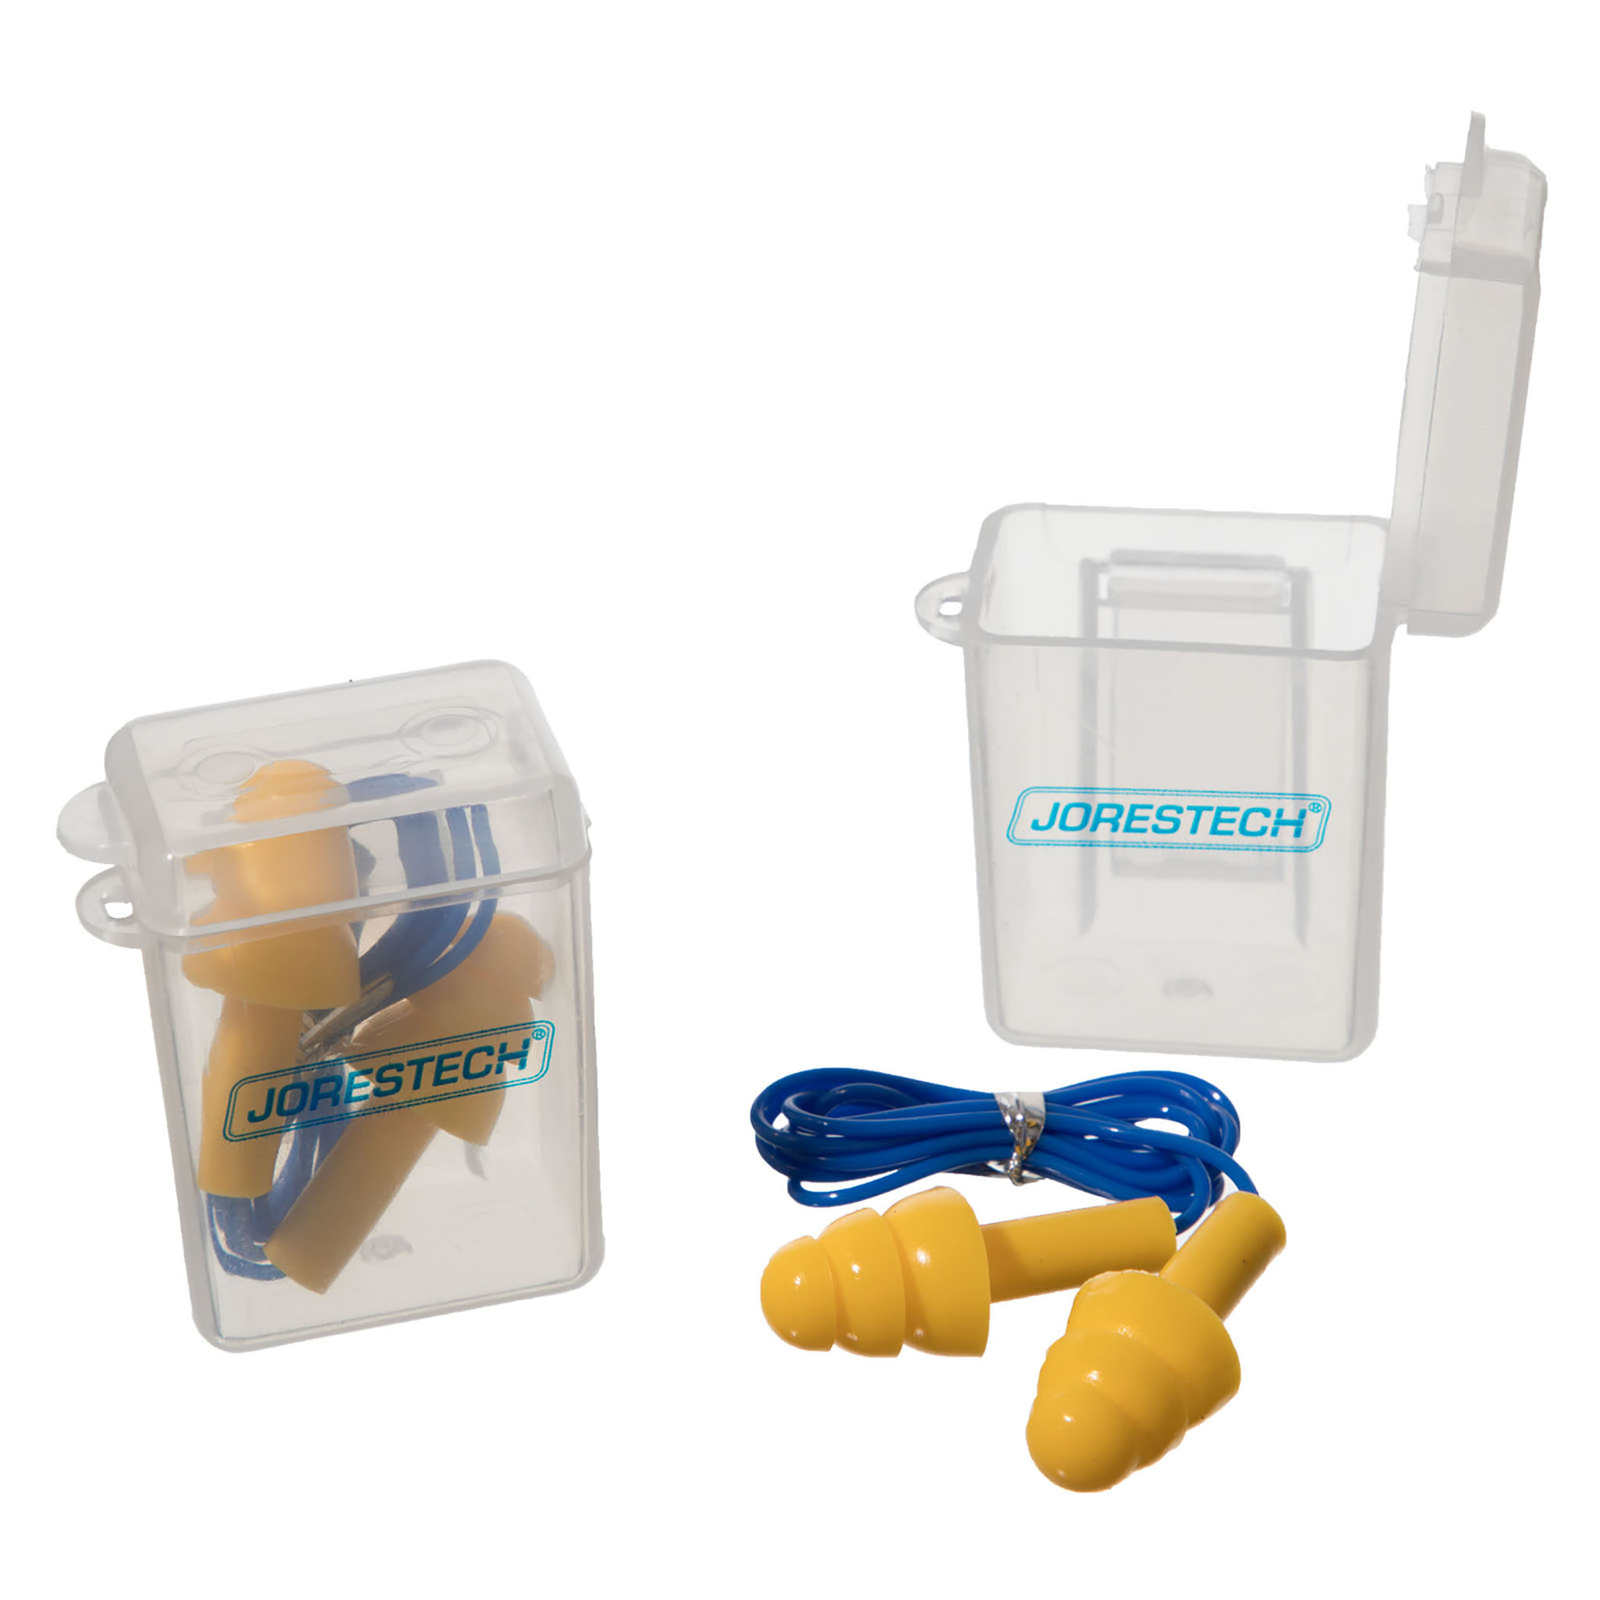 Features one set of silicone tri flange corded JORESTECH® earplug inside a carry on container of plastic, and another earplug set beside an open empty carry on container. This shows that the package comes with 2 carry on small containers